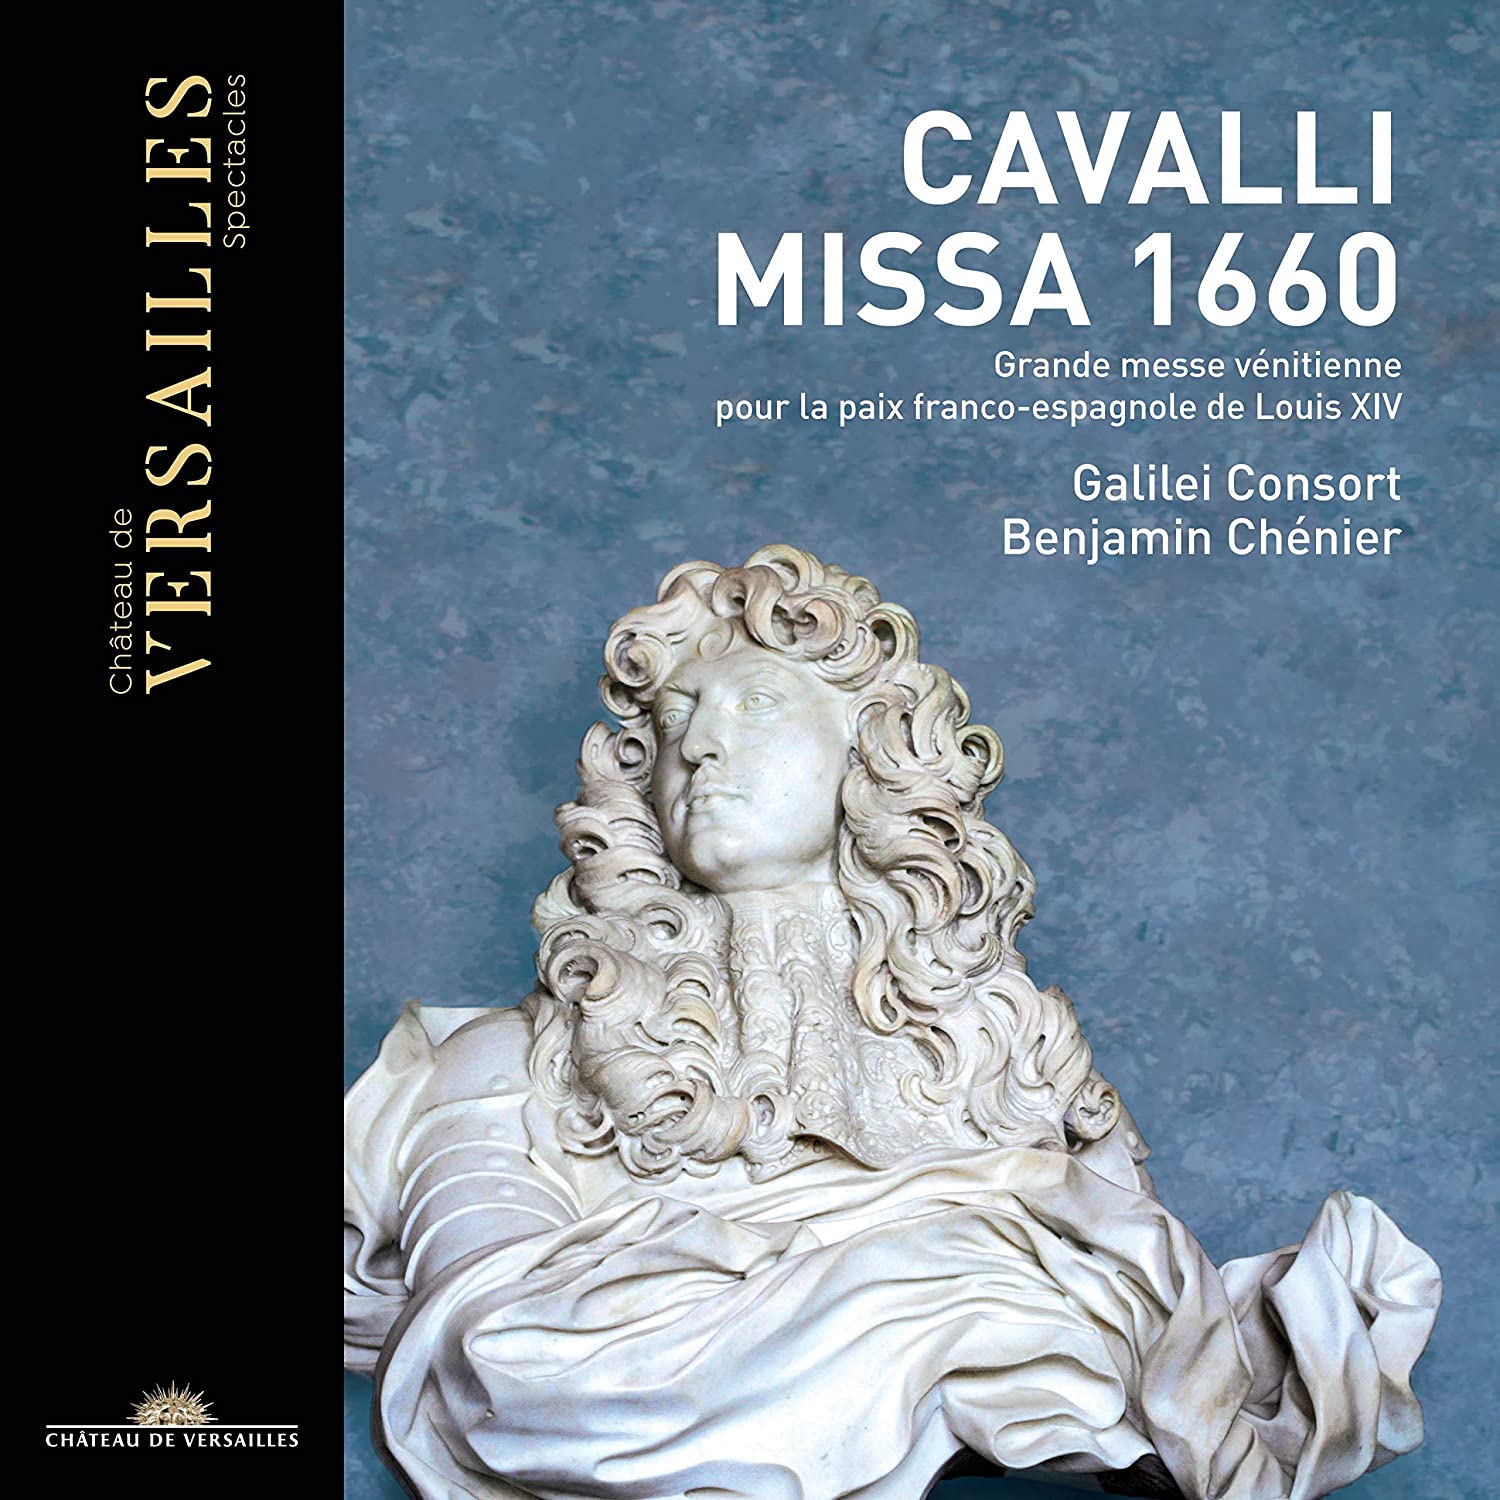 Cover of Versailles Spectacles CD of Cavalli Missa 1660